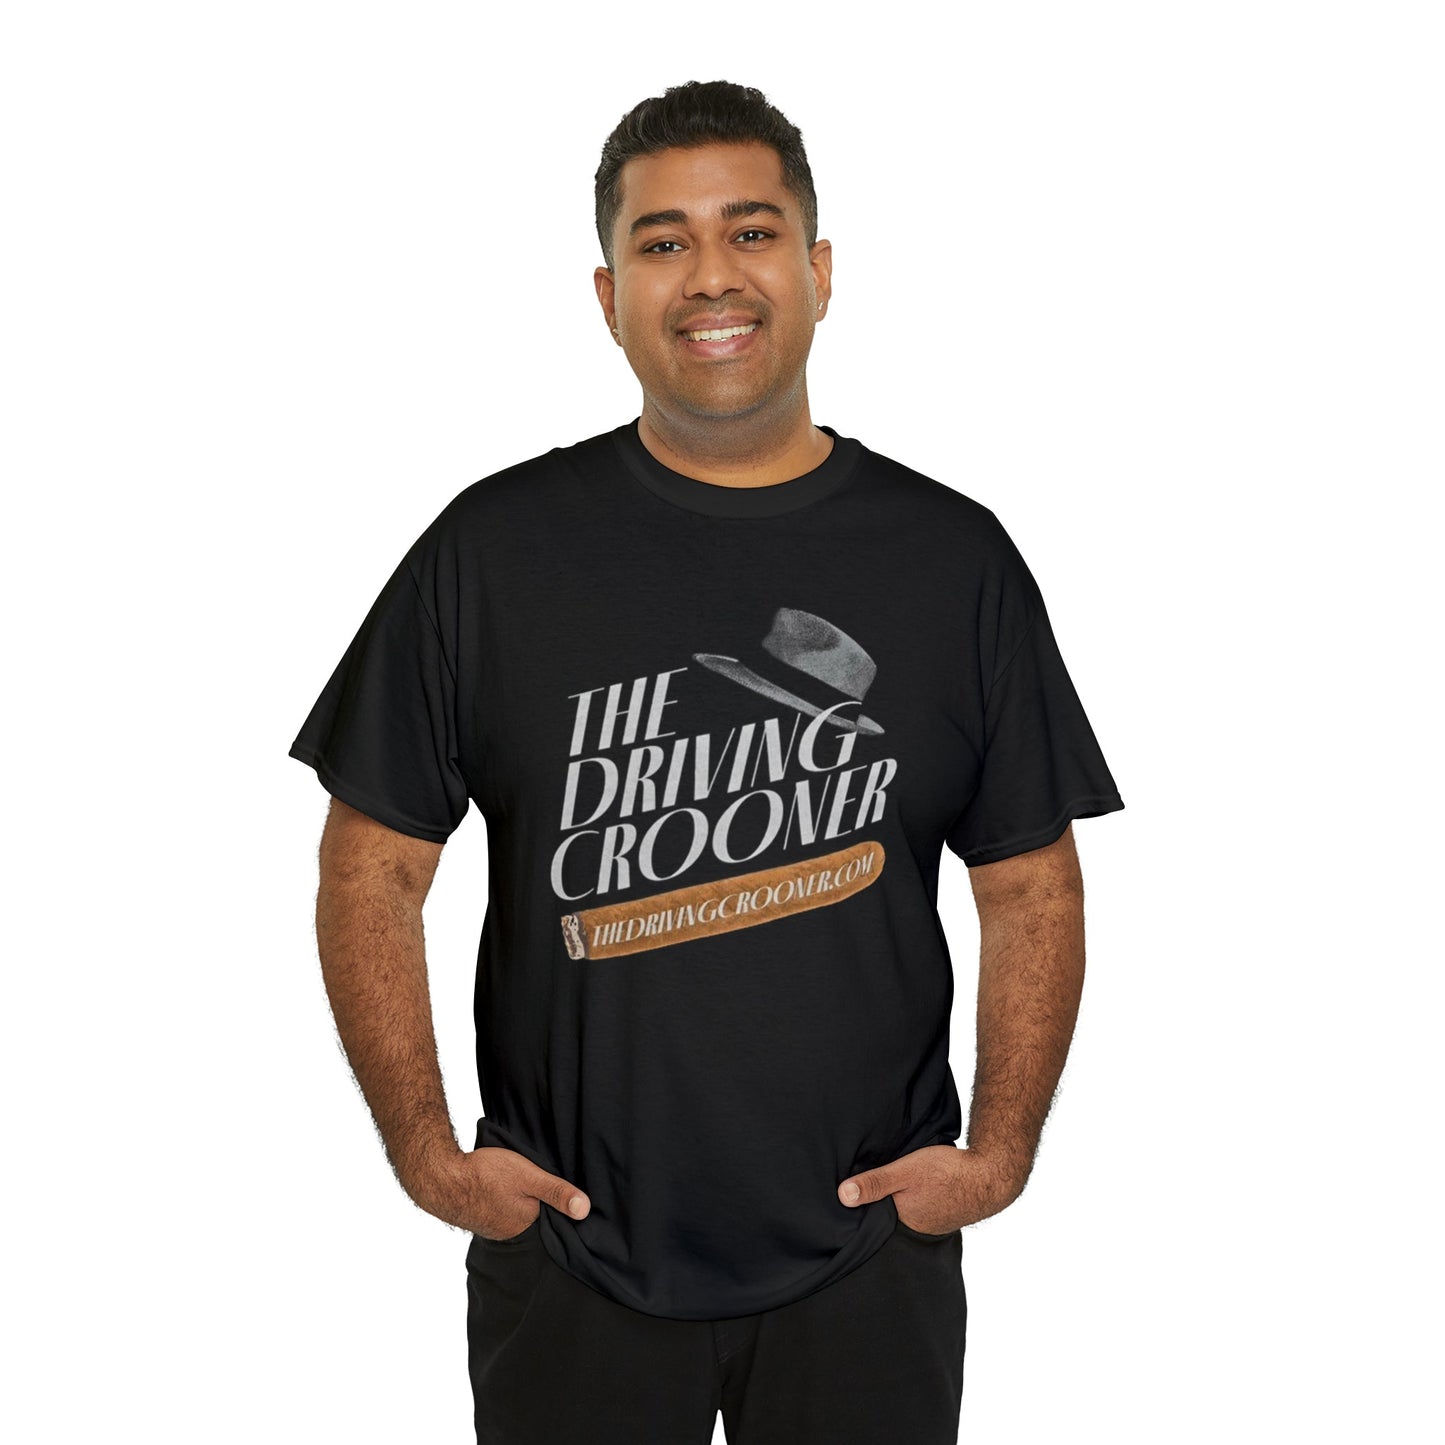 The Driving Crooner I Think You Should Leave ITYSL T-Shirt - RetroTeeShop